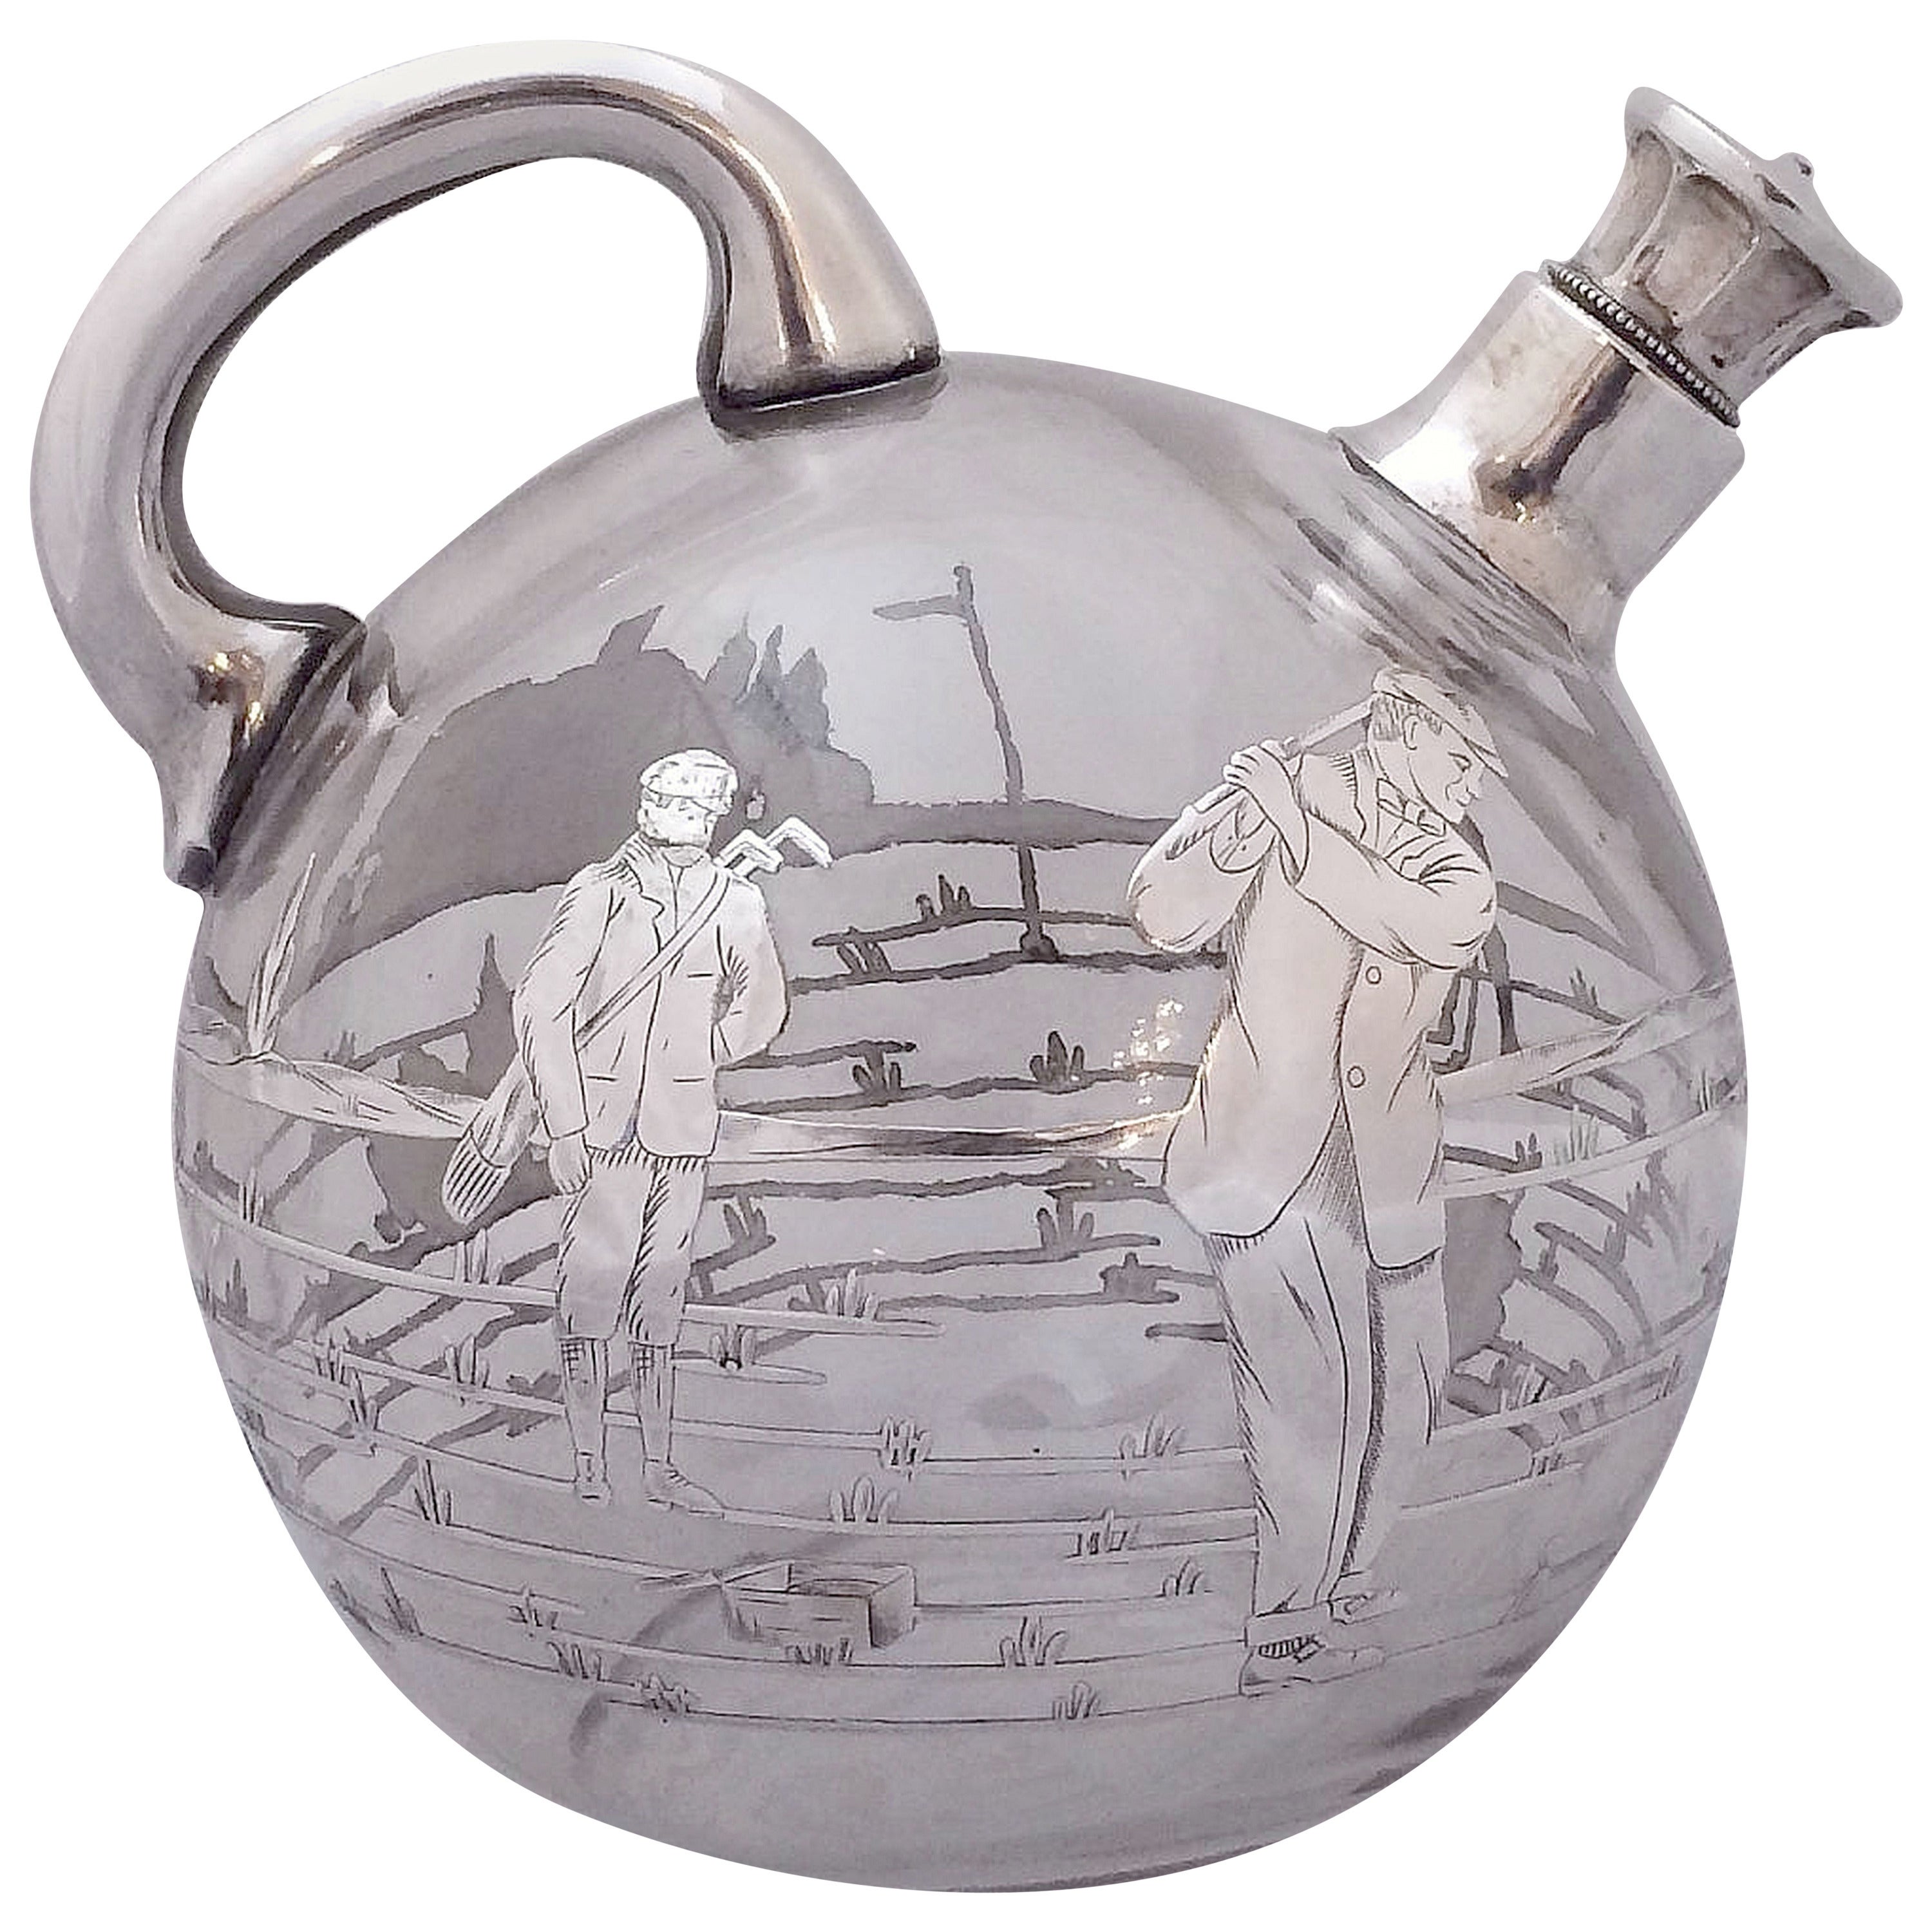 Silver Overlay Spirits Decanter with Golfers